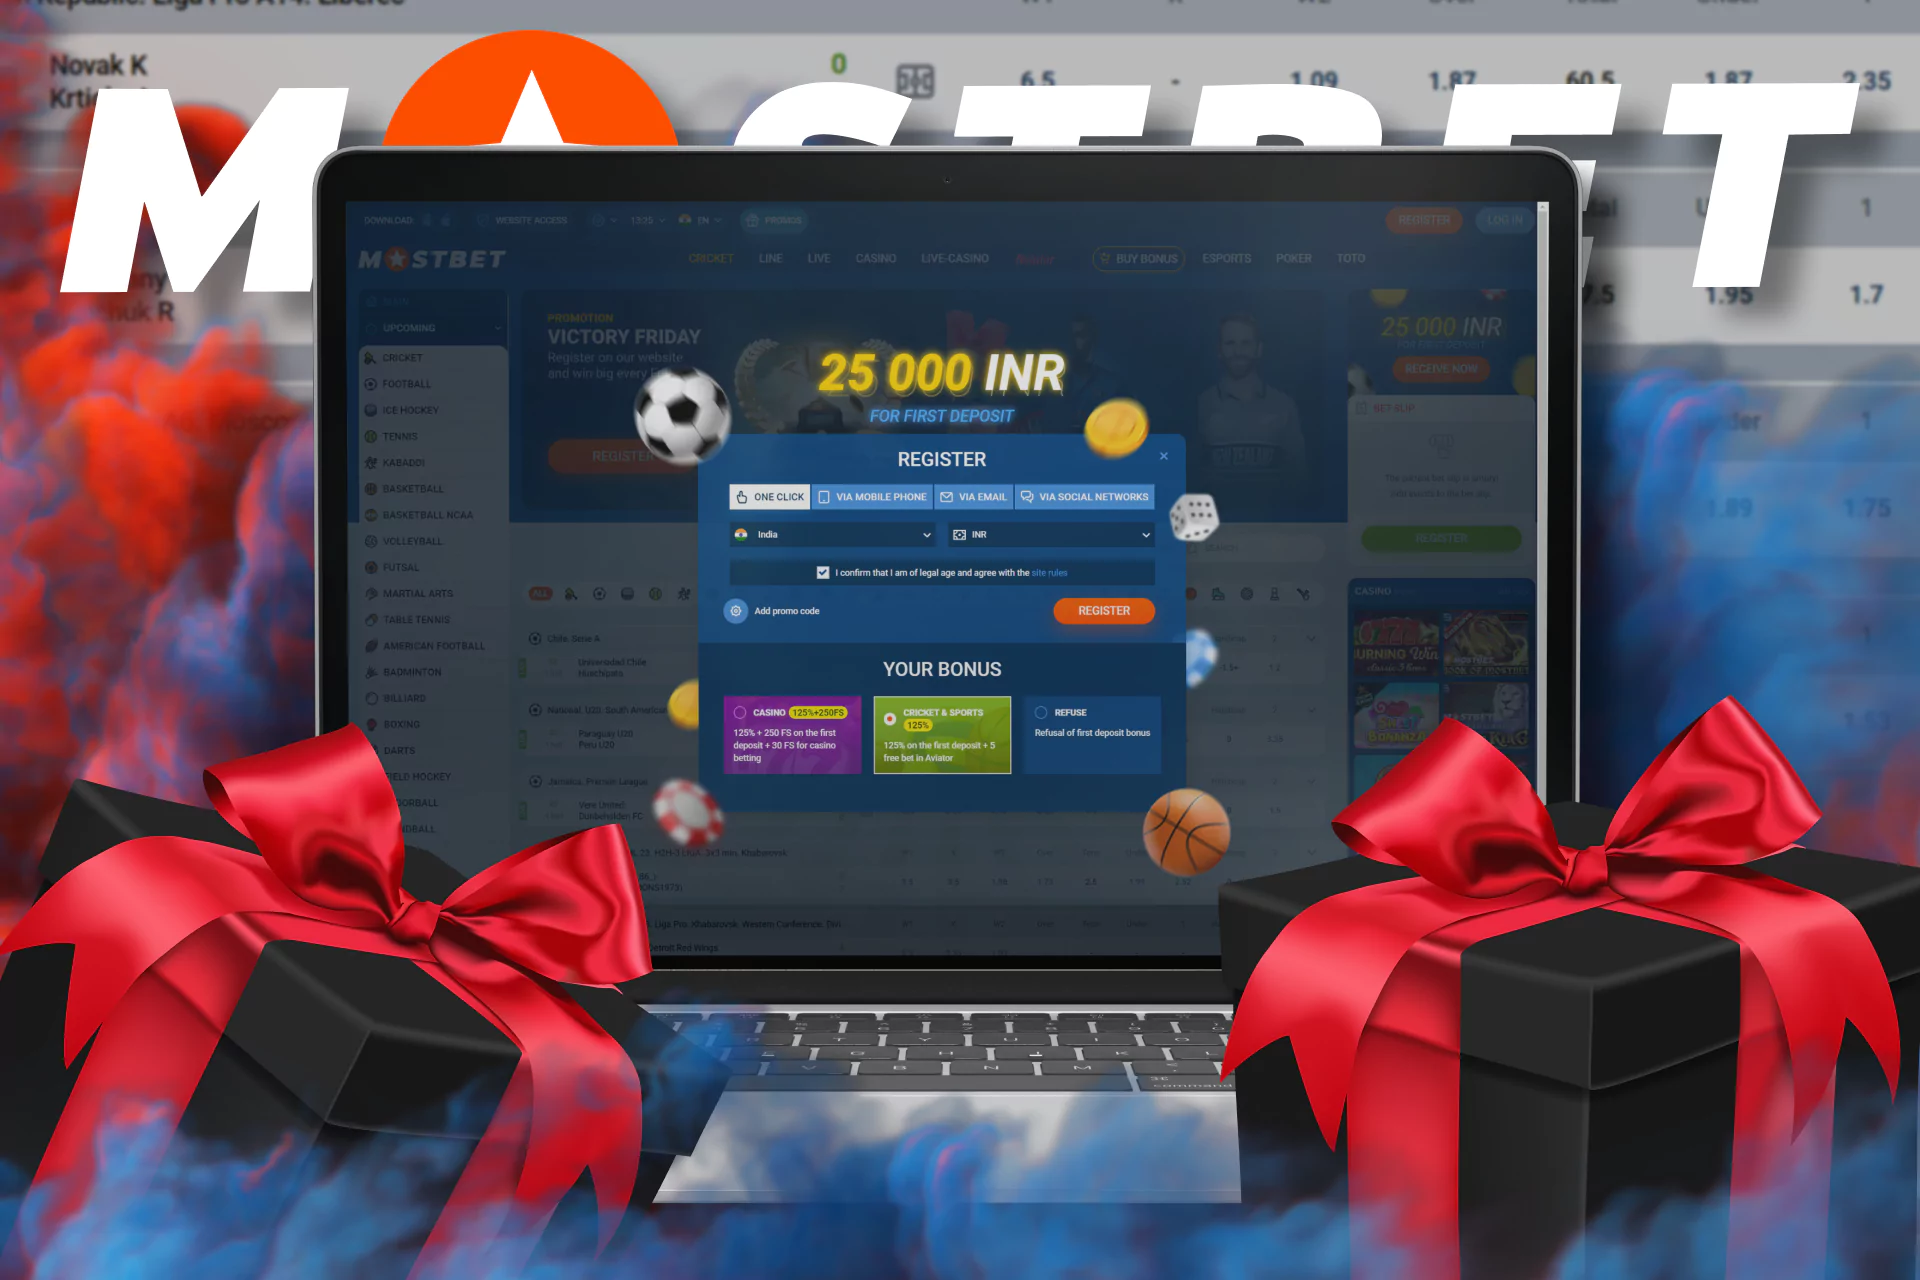 At Mostbet, get a special bonus on your first deposit when you register.